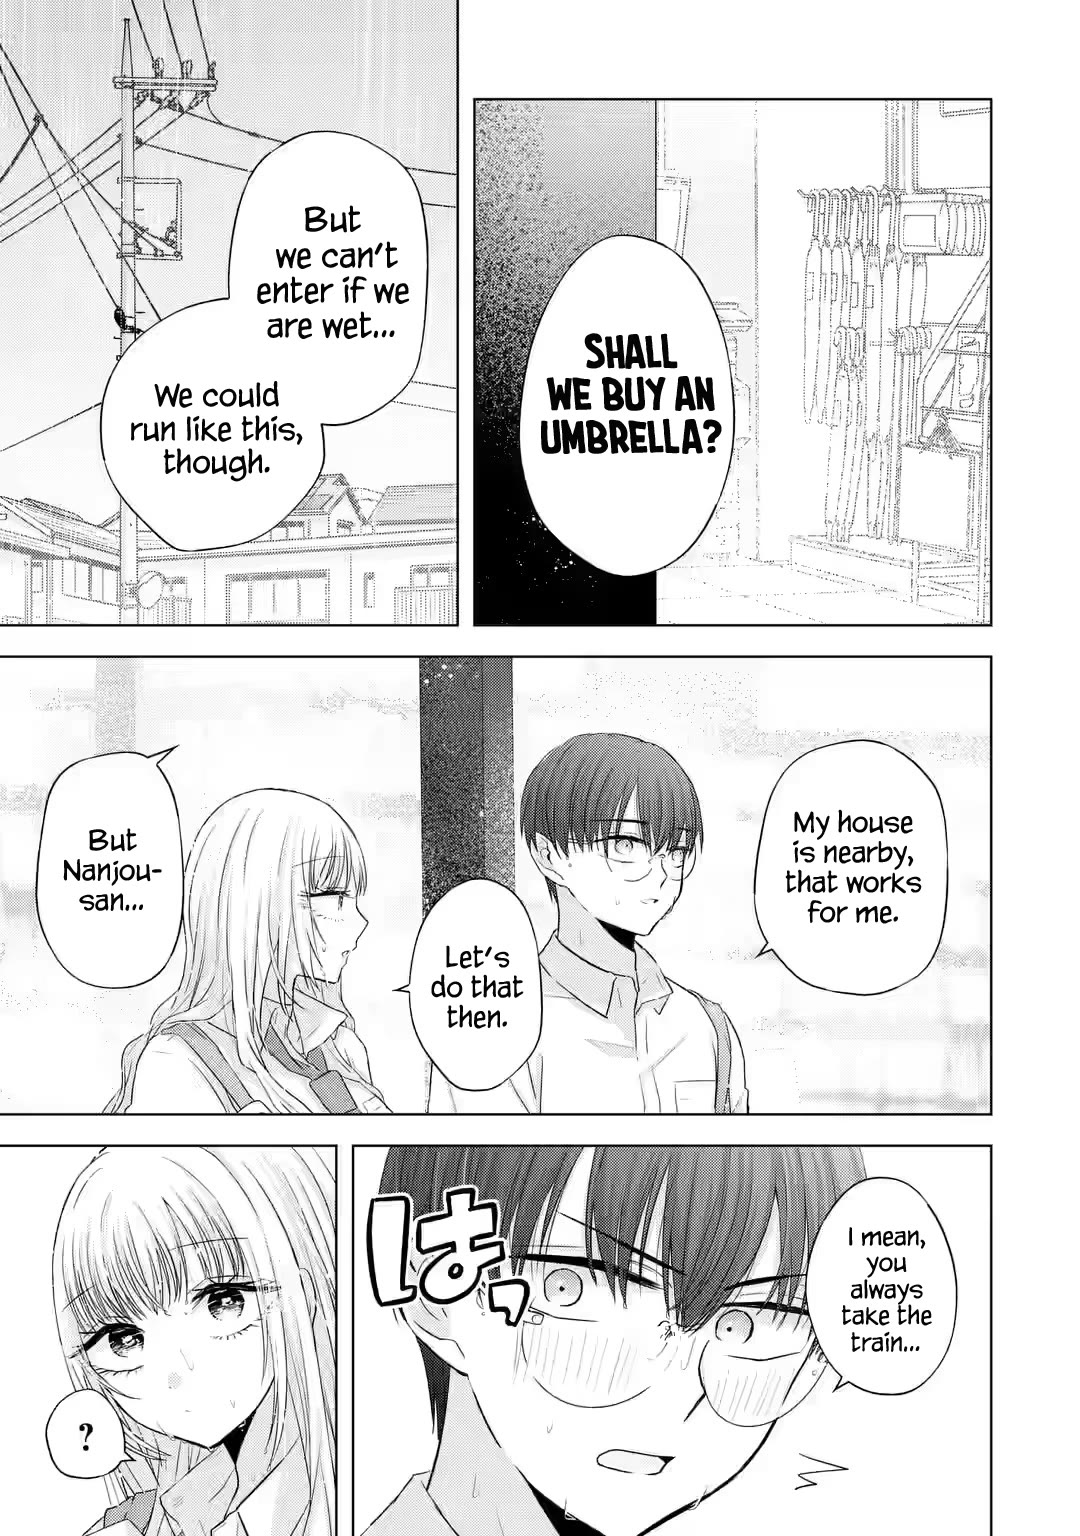 Nanjou-san Wants to Be Held by Me - chapter 7 - #6